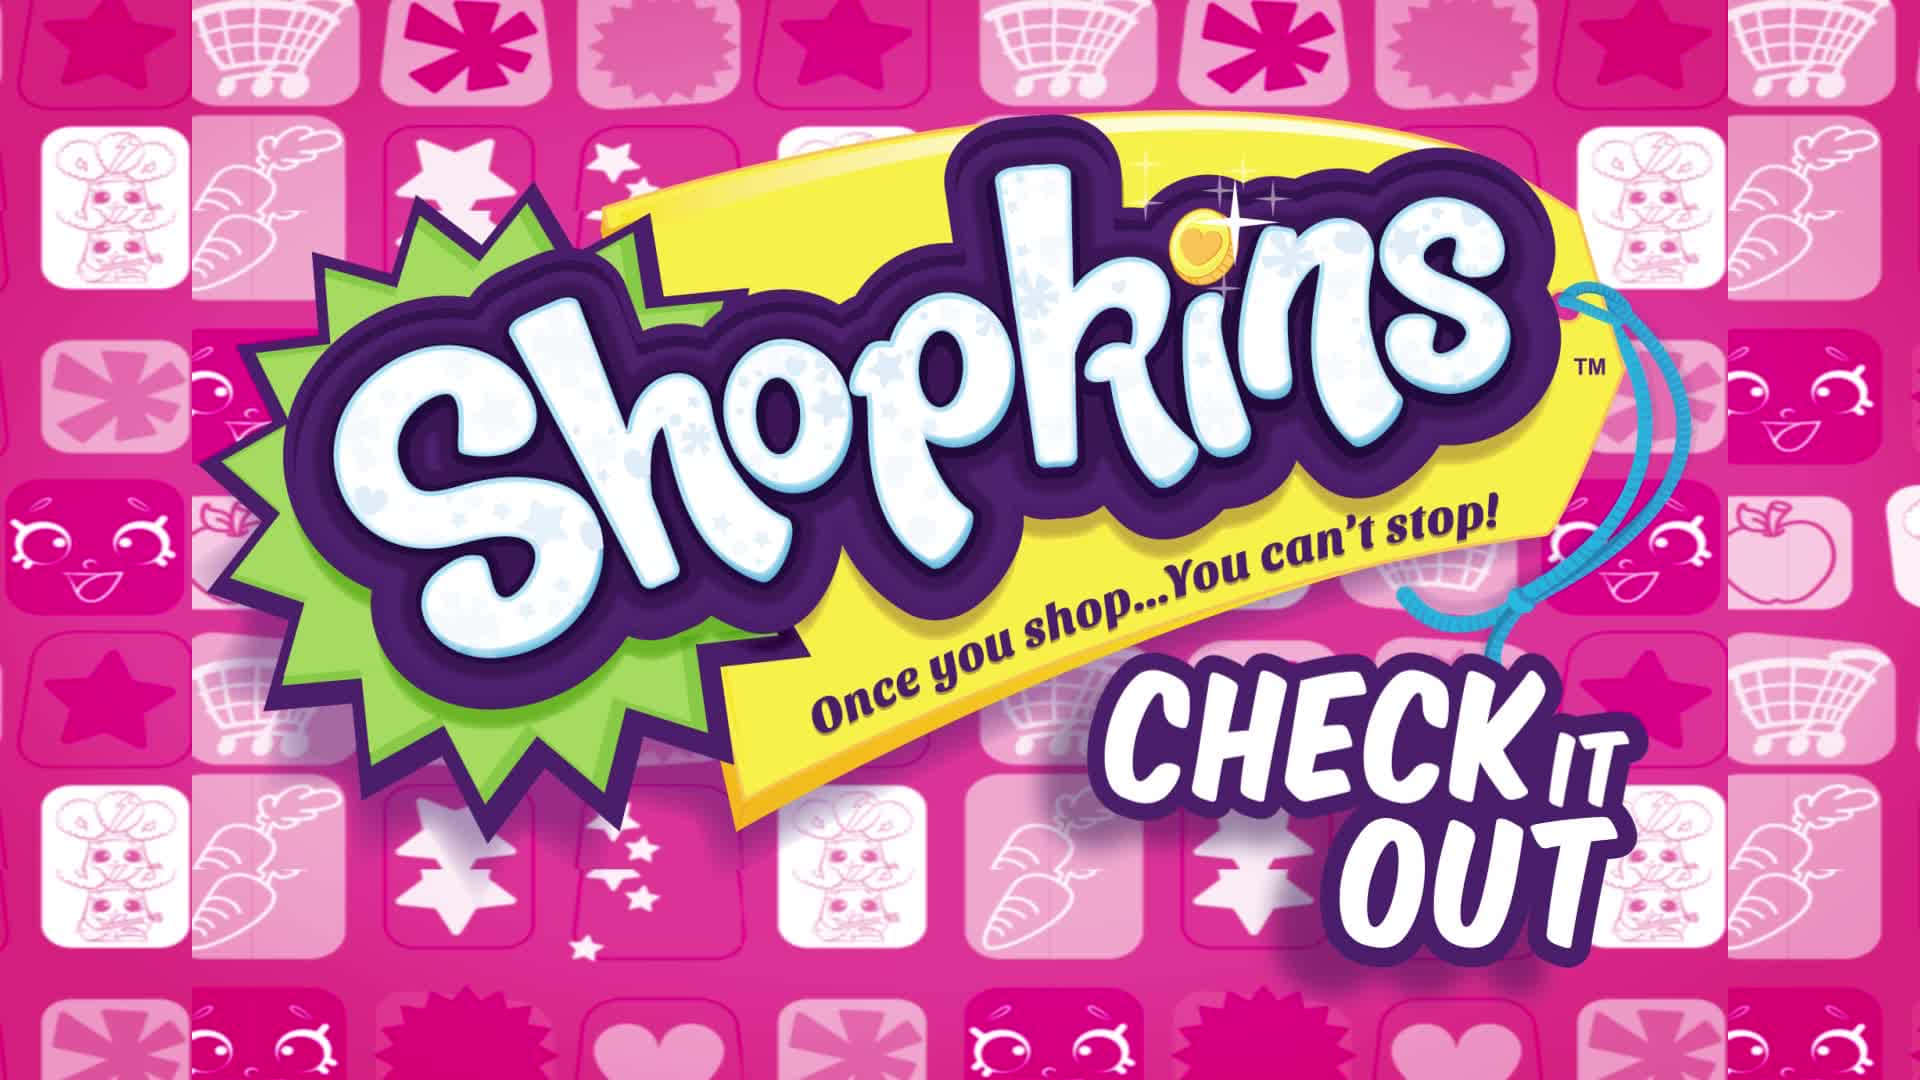 Have Fun With All Your Favorite Shopkins!